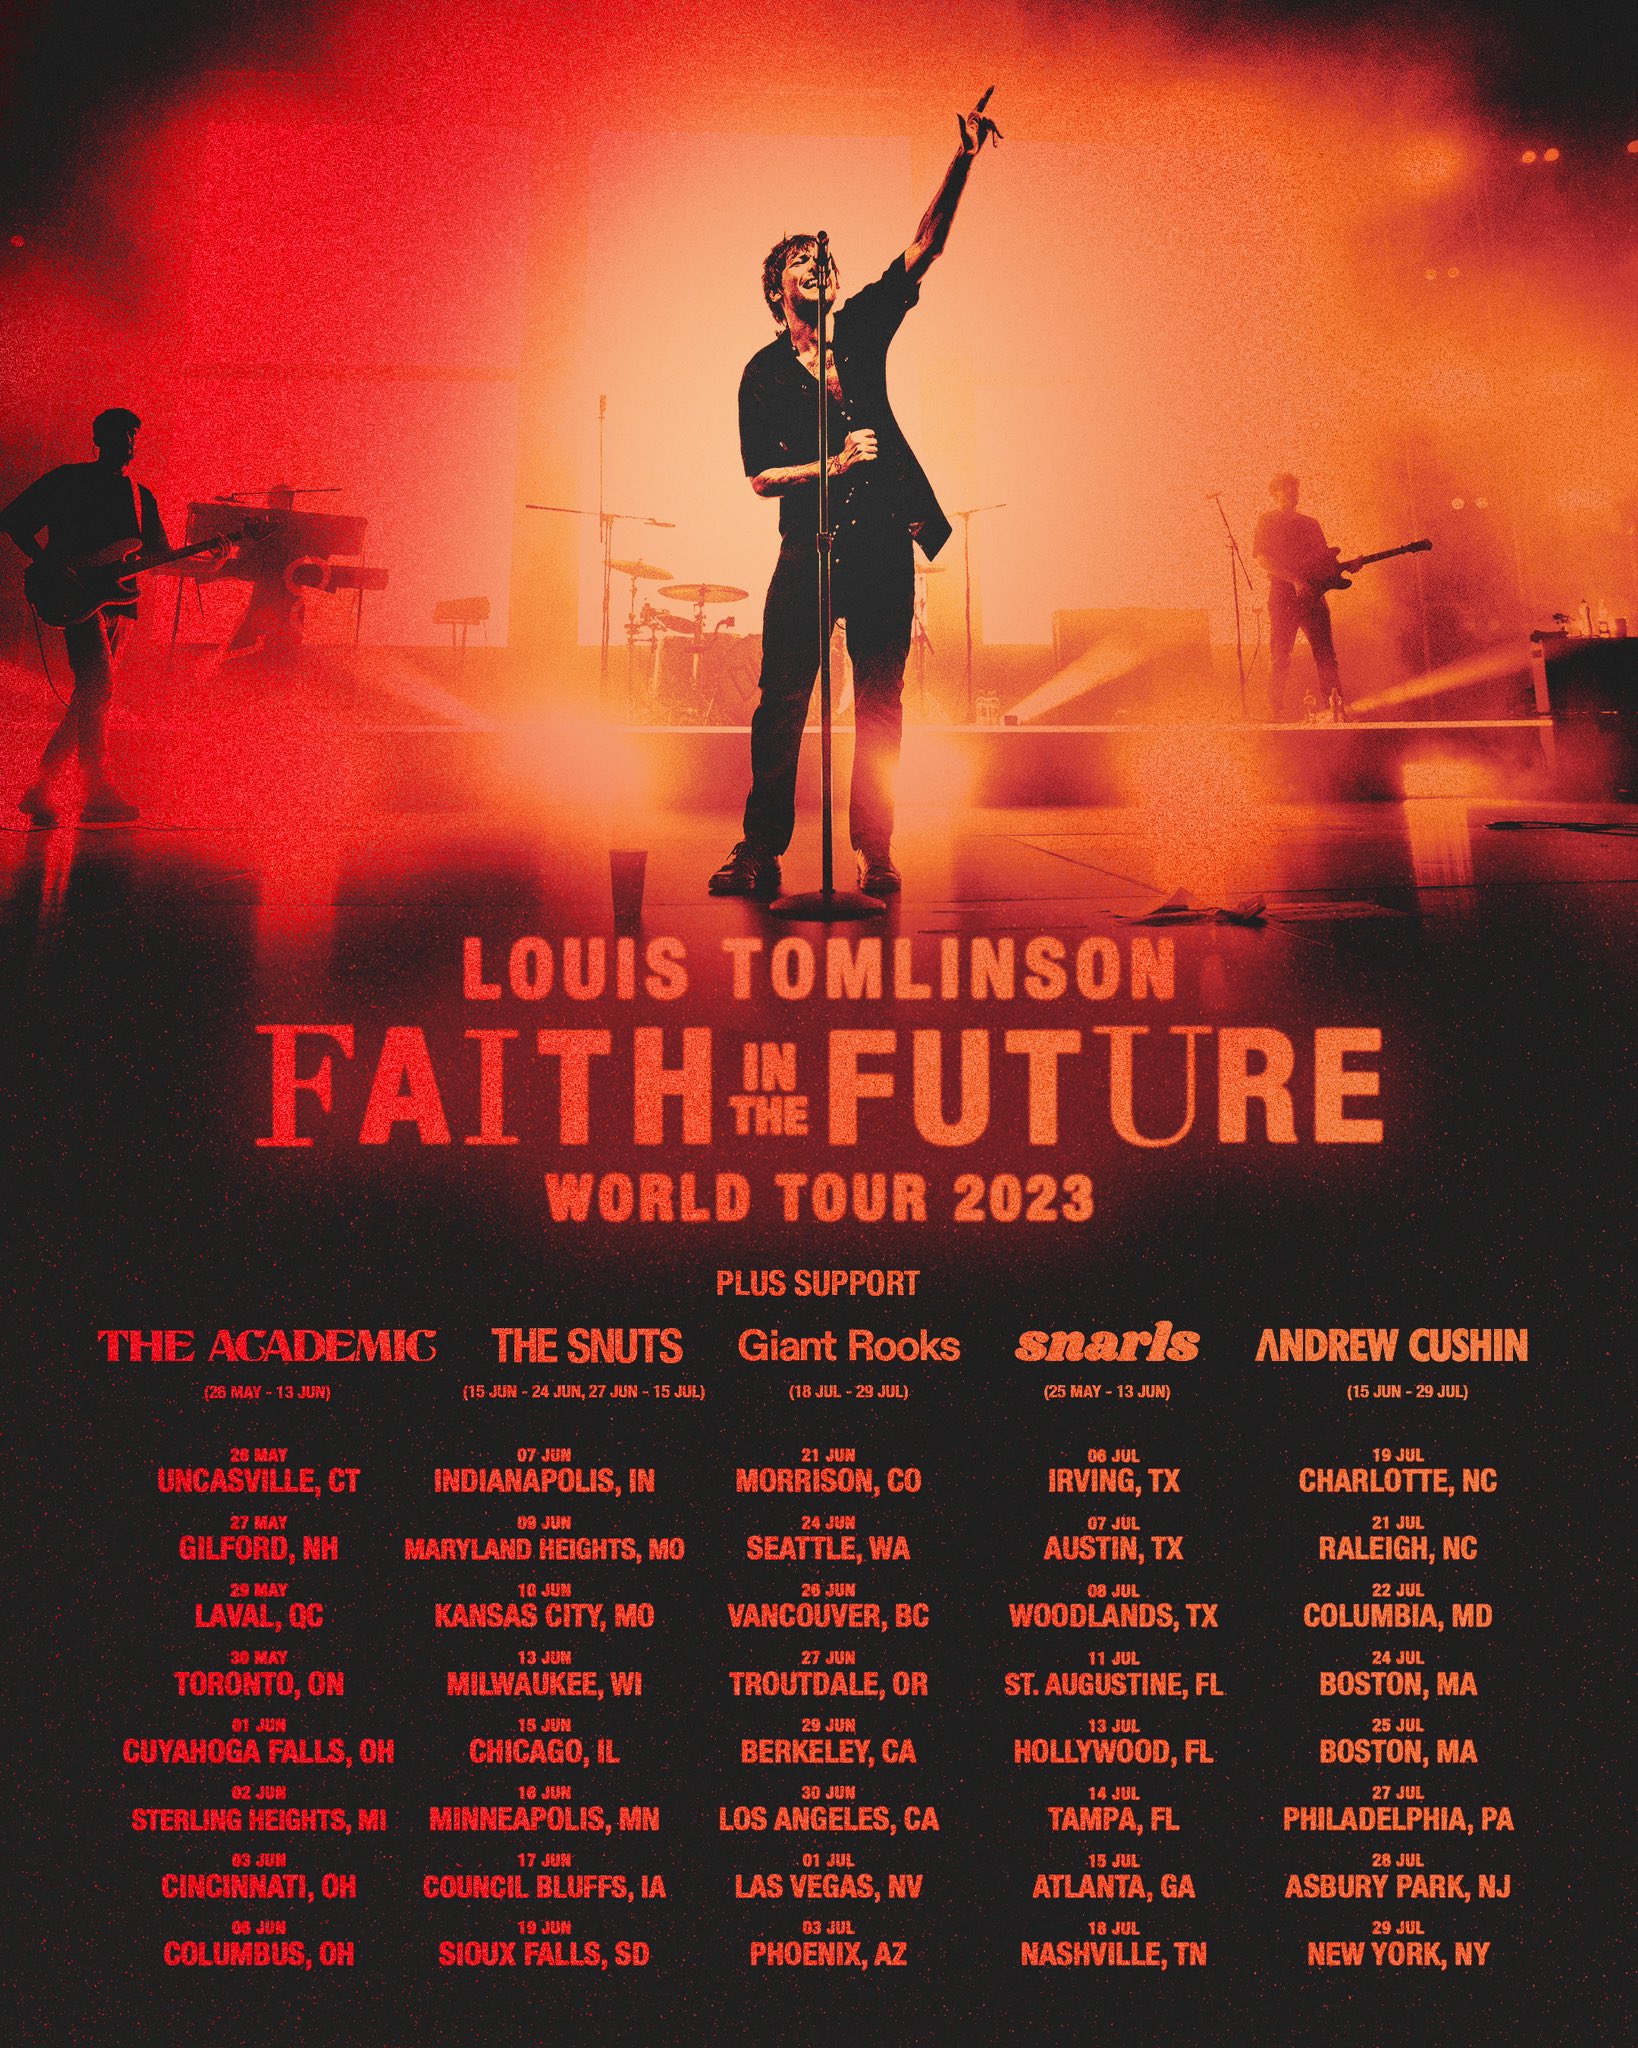 Louis Tomlinson on X: FAITH IN THE FUTURE WORLD TOUR 2023. NORTH AMERICA.  Can't wait to get back on the road very soon! Joining me will be  @theacademic, @thesnuts, @giantrooksmusic, @snarlsband, and @